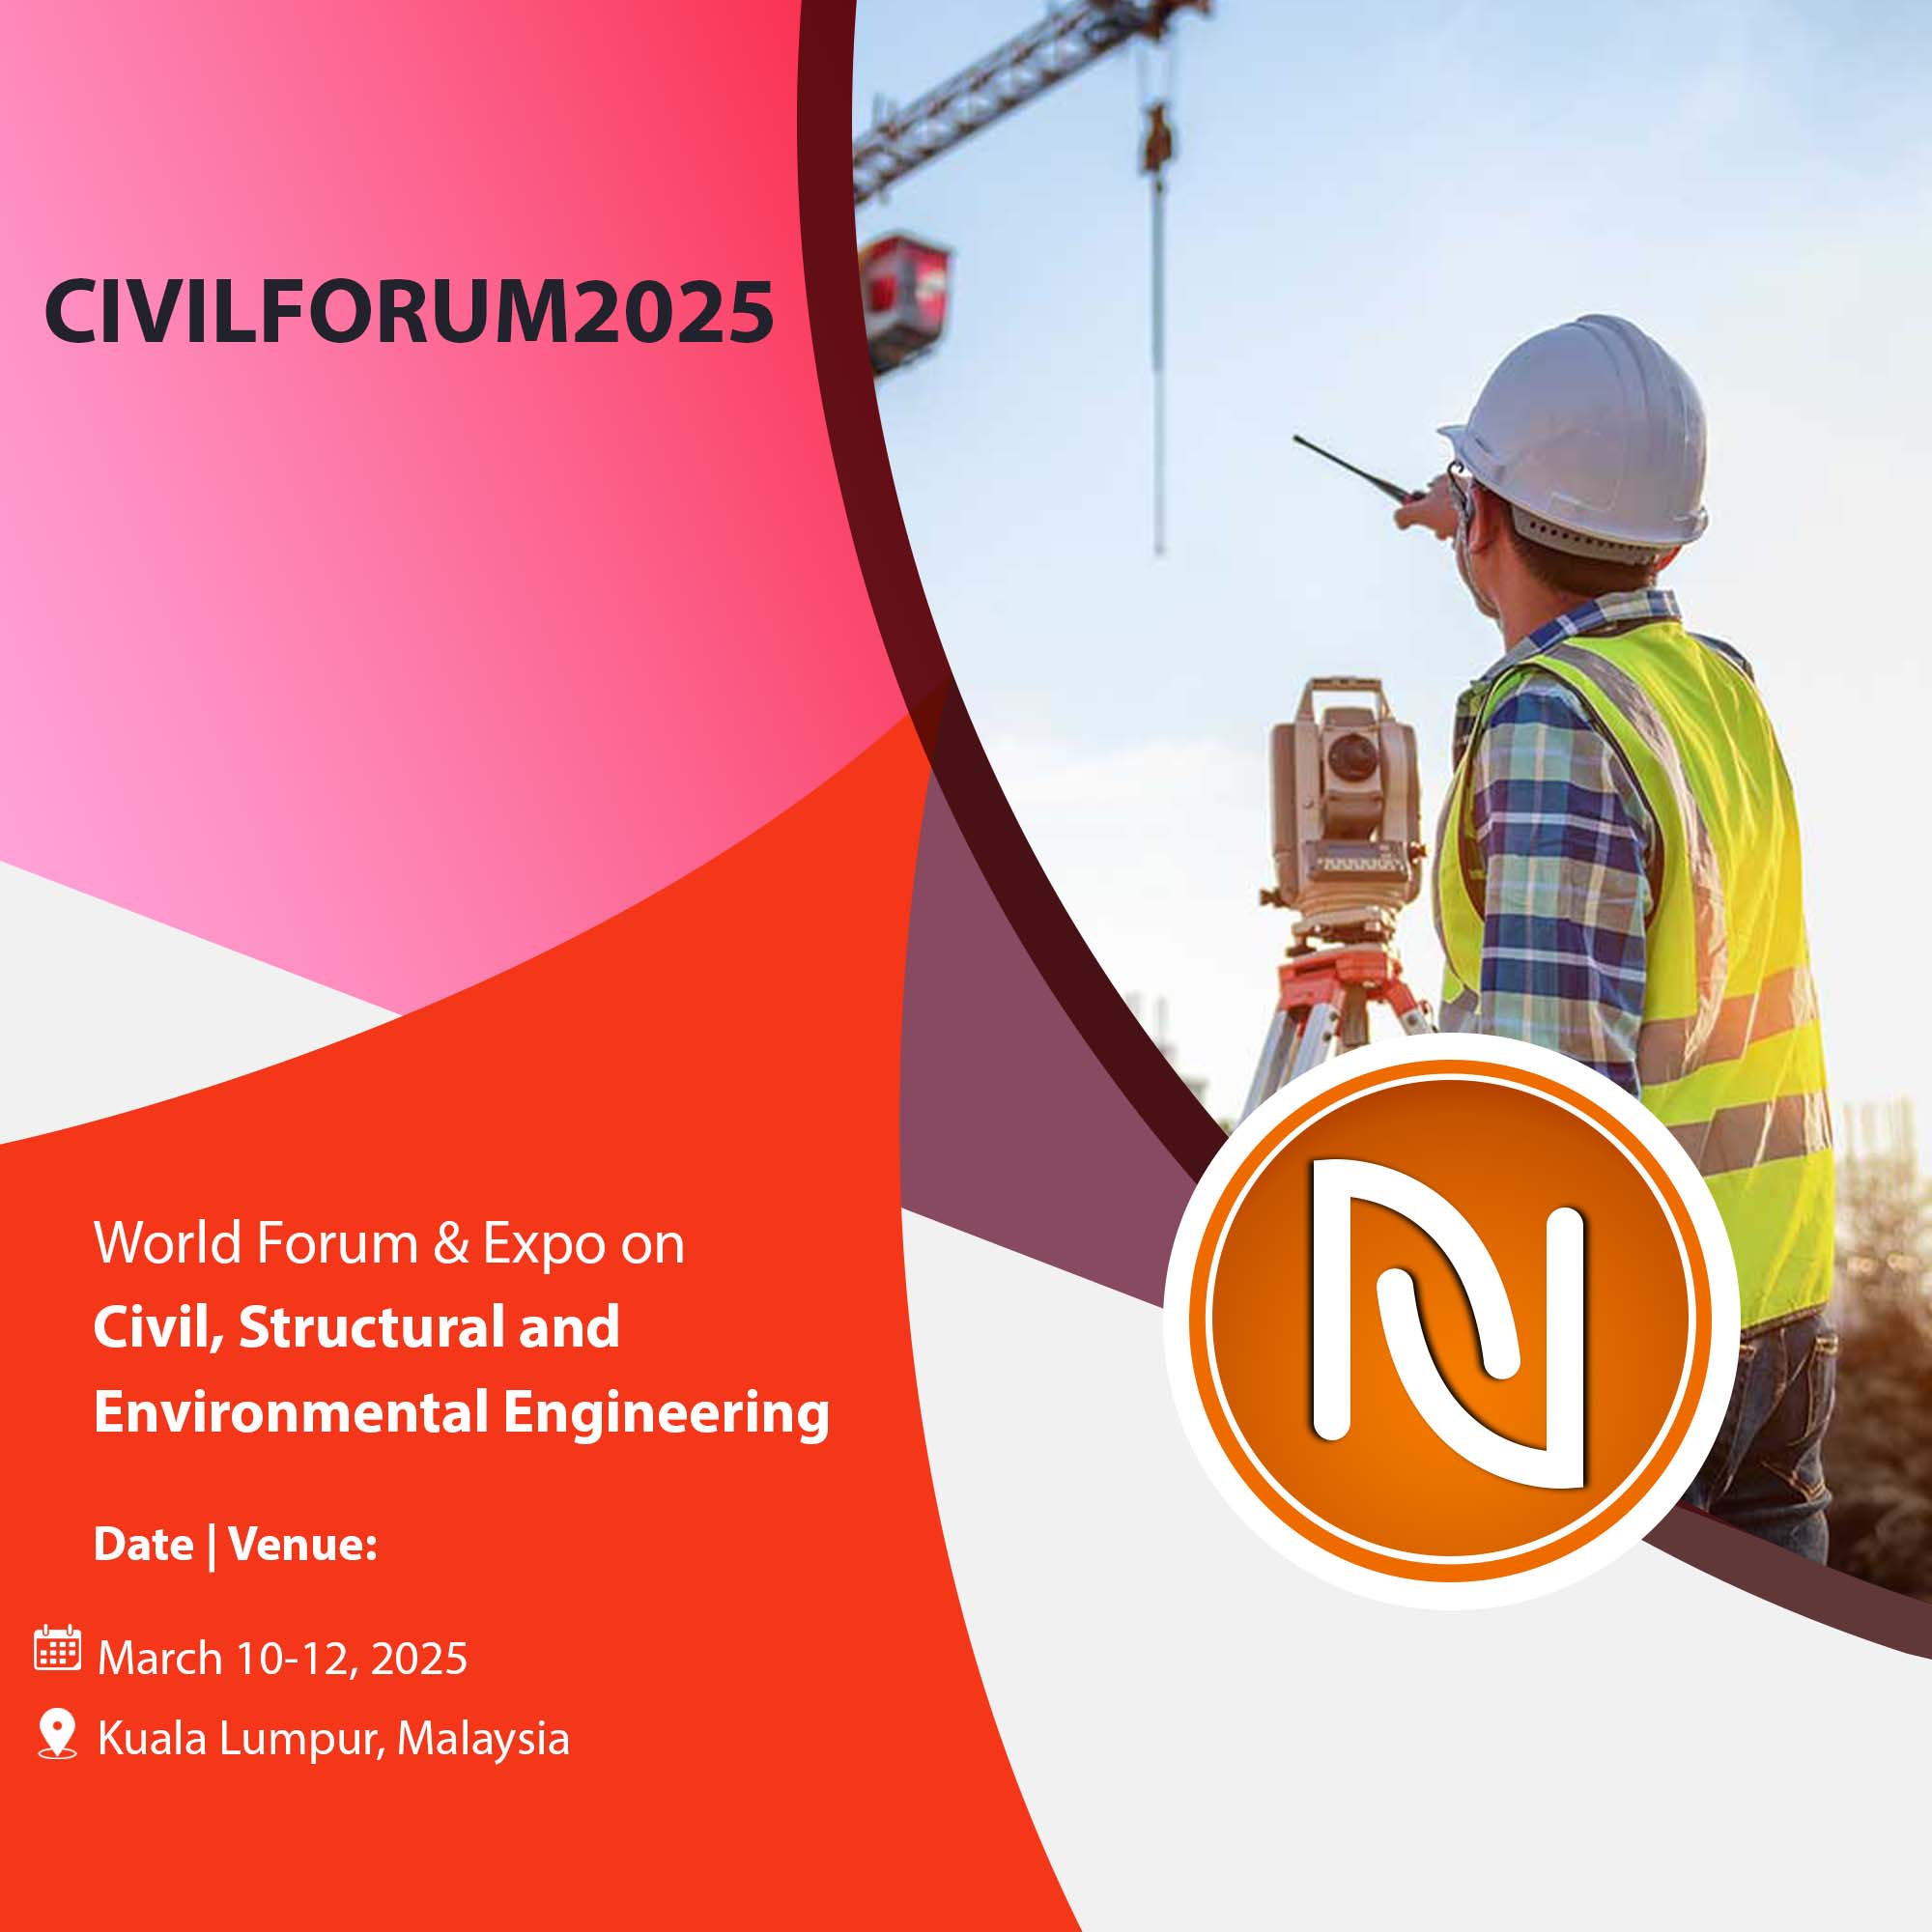 World Forum & Expo on Civil, Structural and Environmental Engineering(CIVILFORUM2025)